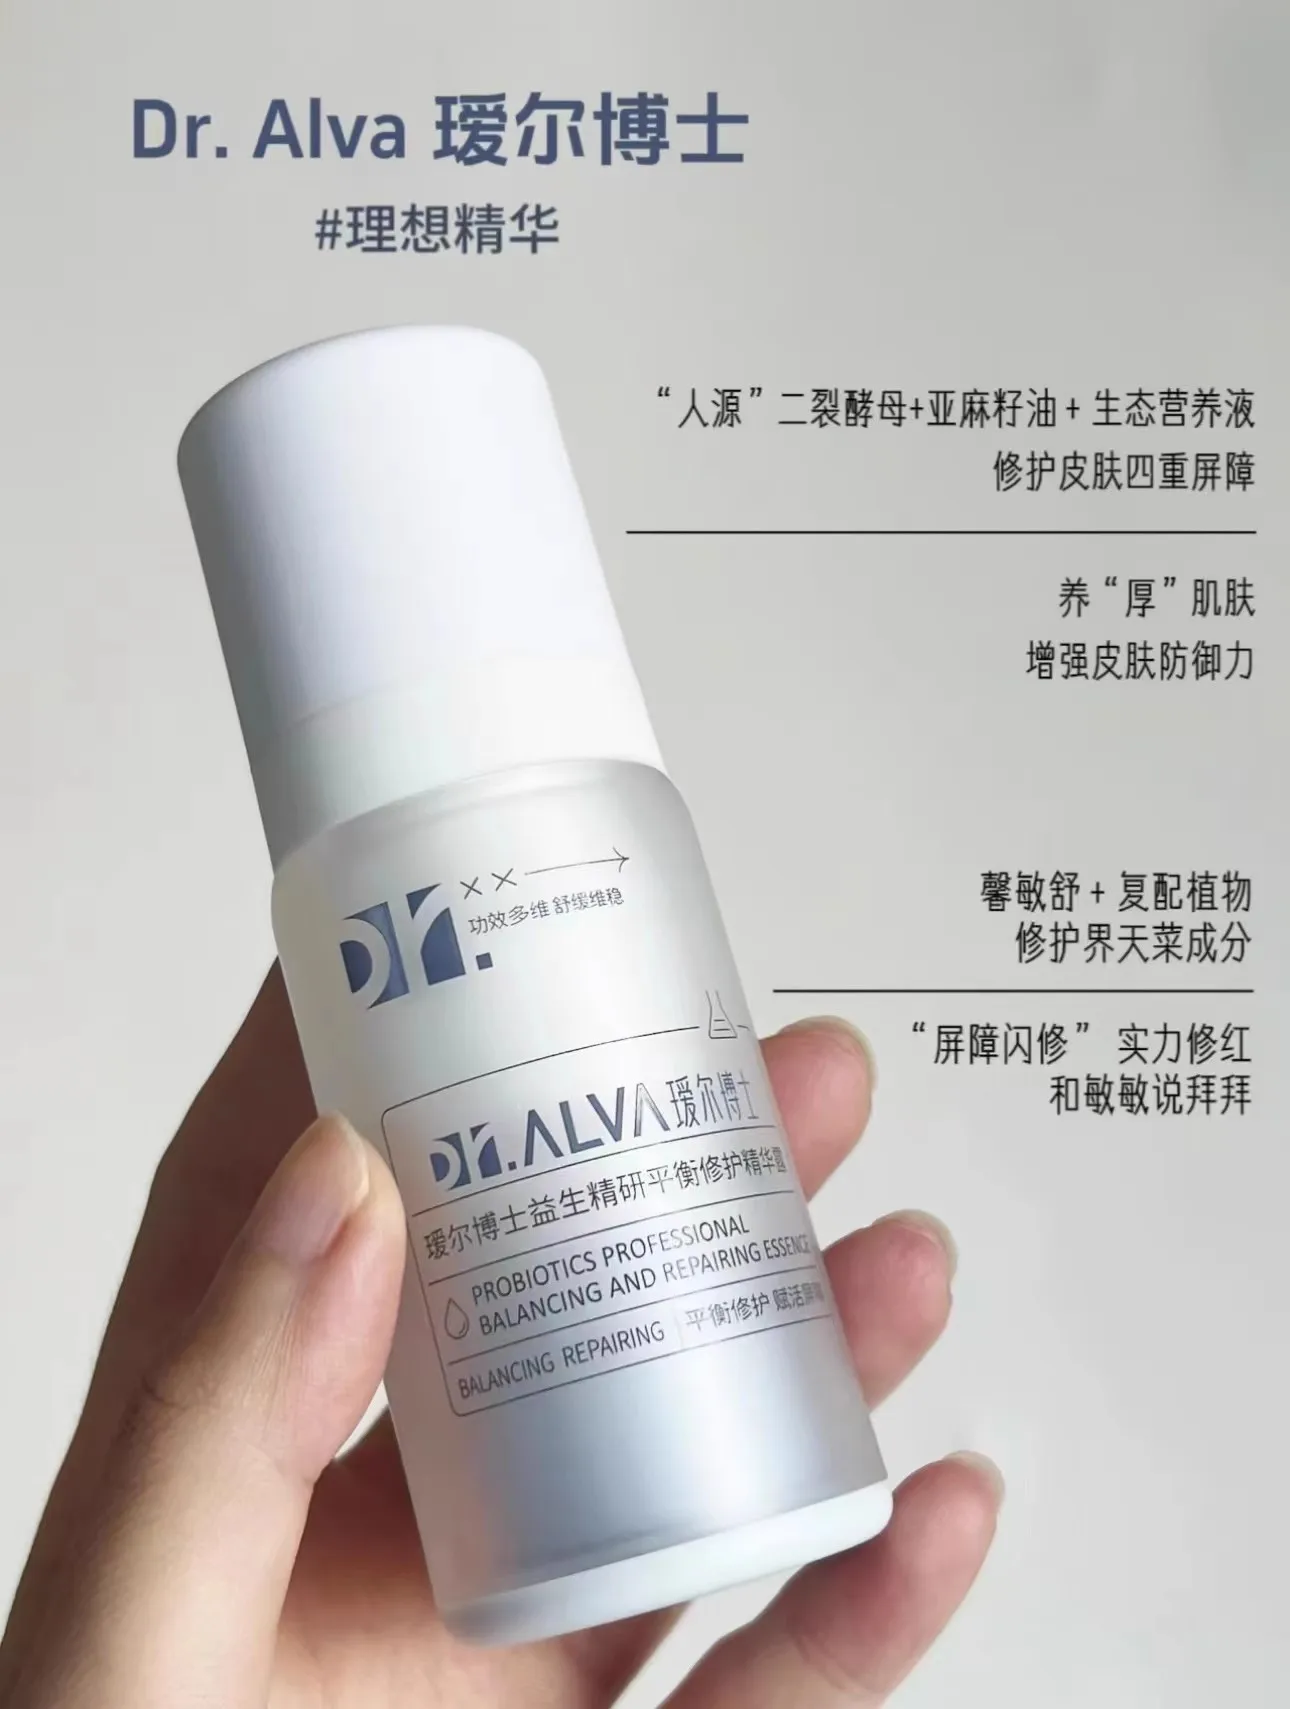 

DR.ALVA Dralva Ideal Essence Hydrating Moisturizing Serums Moisturizes Soothes Redness Repair Barrier Skincare Face Care